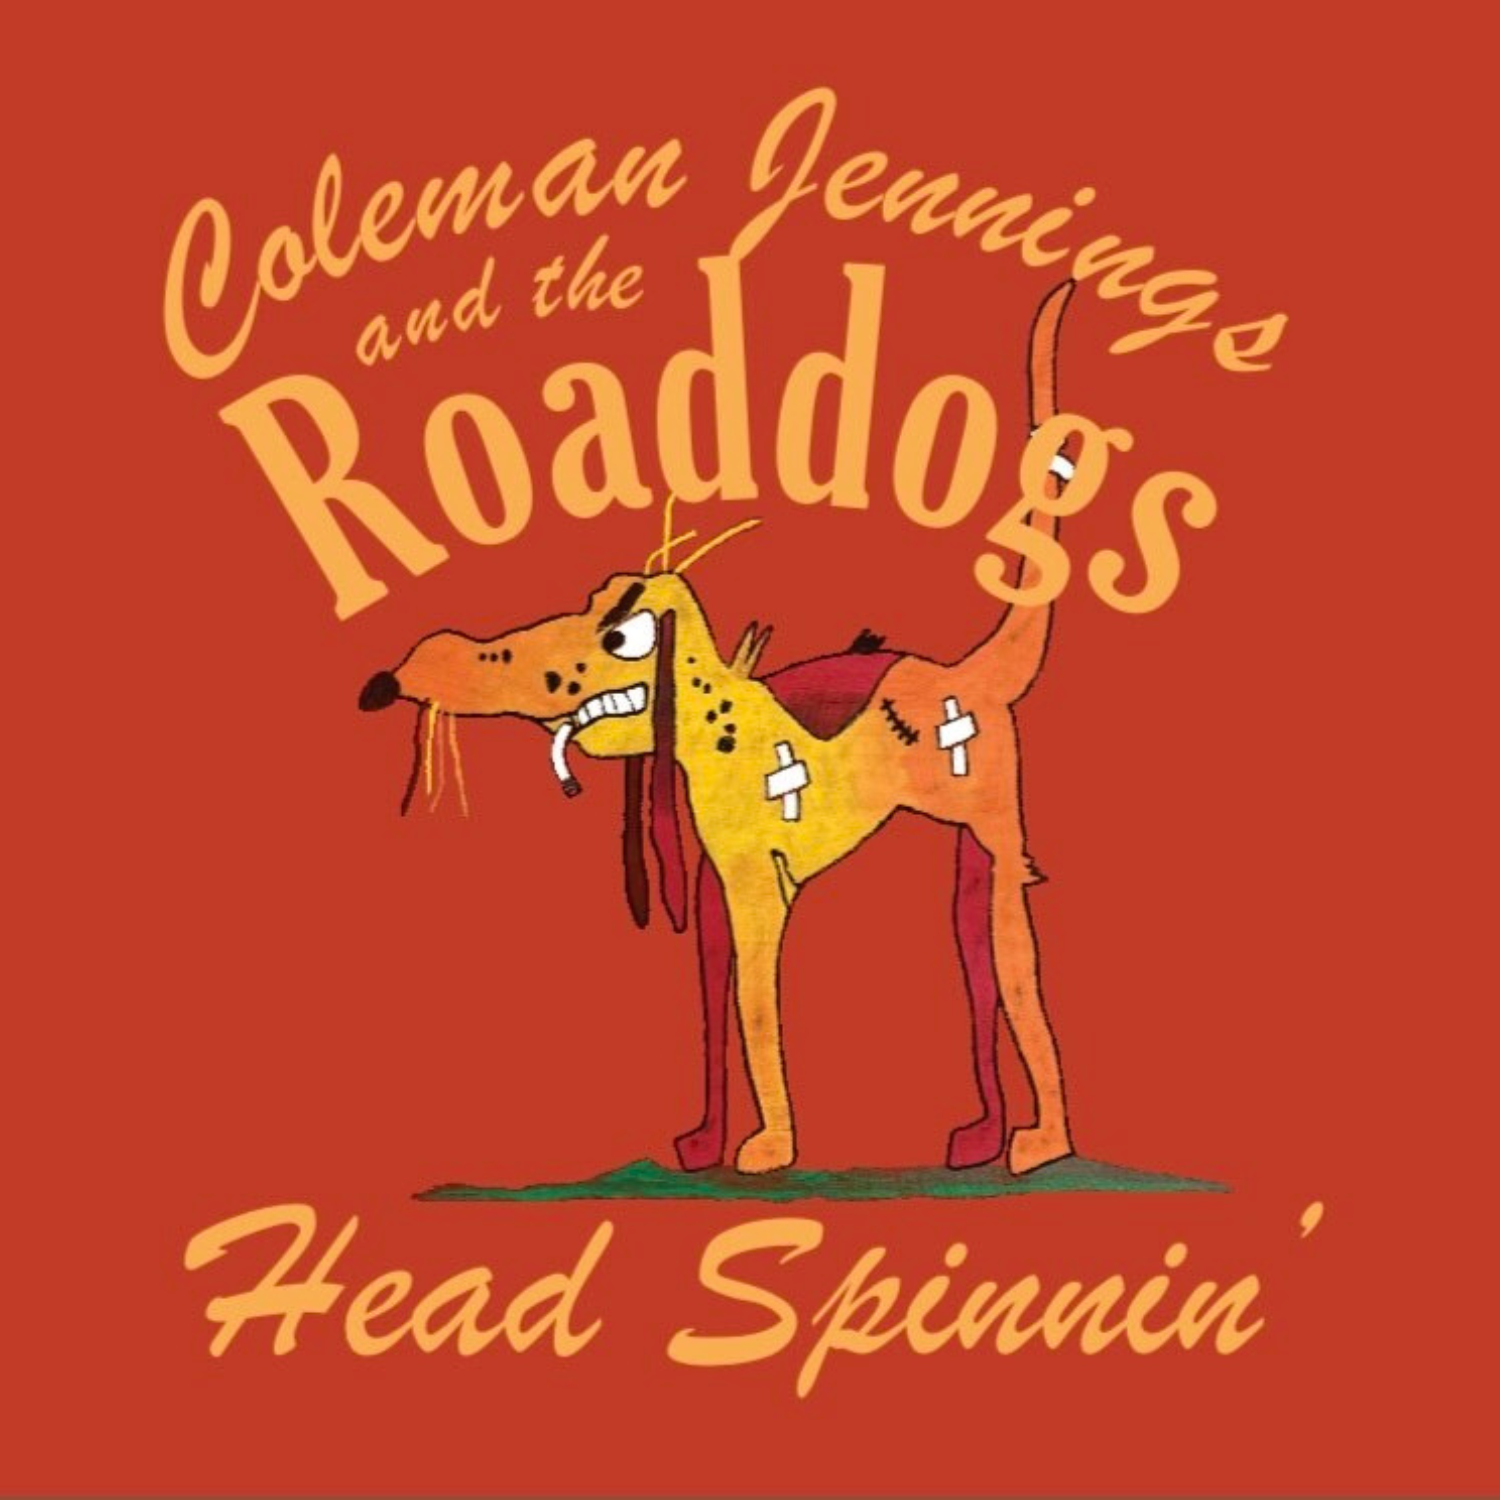 Head Spinnin'” from Coleman Jennings and the Roaddogs Out Today; Debut EP  Release Jan. 27 — Milestone Publicity